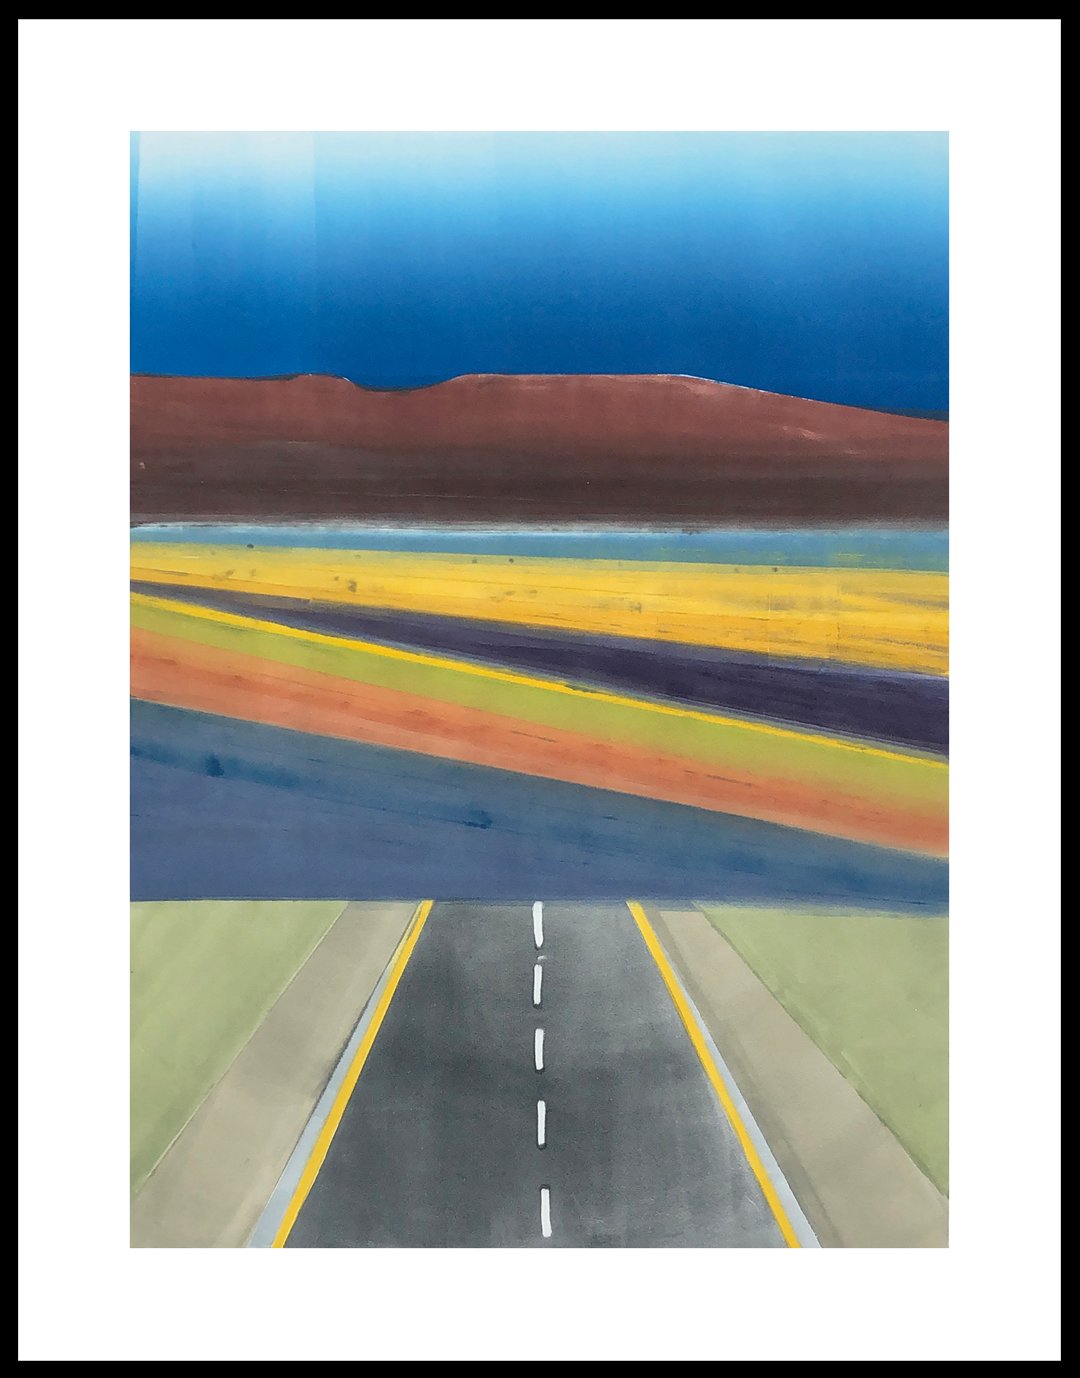    Wide Open Roads   Sometimes the road calls and a car trip is a must.  This image was seared upon my brain as we traveled to Eastern Oregon. I looked up and the road dropped away. I had to create it! Plate size 26 x18, Unframed 1/1   SOLD  